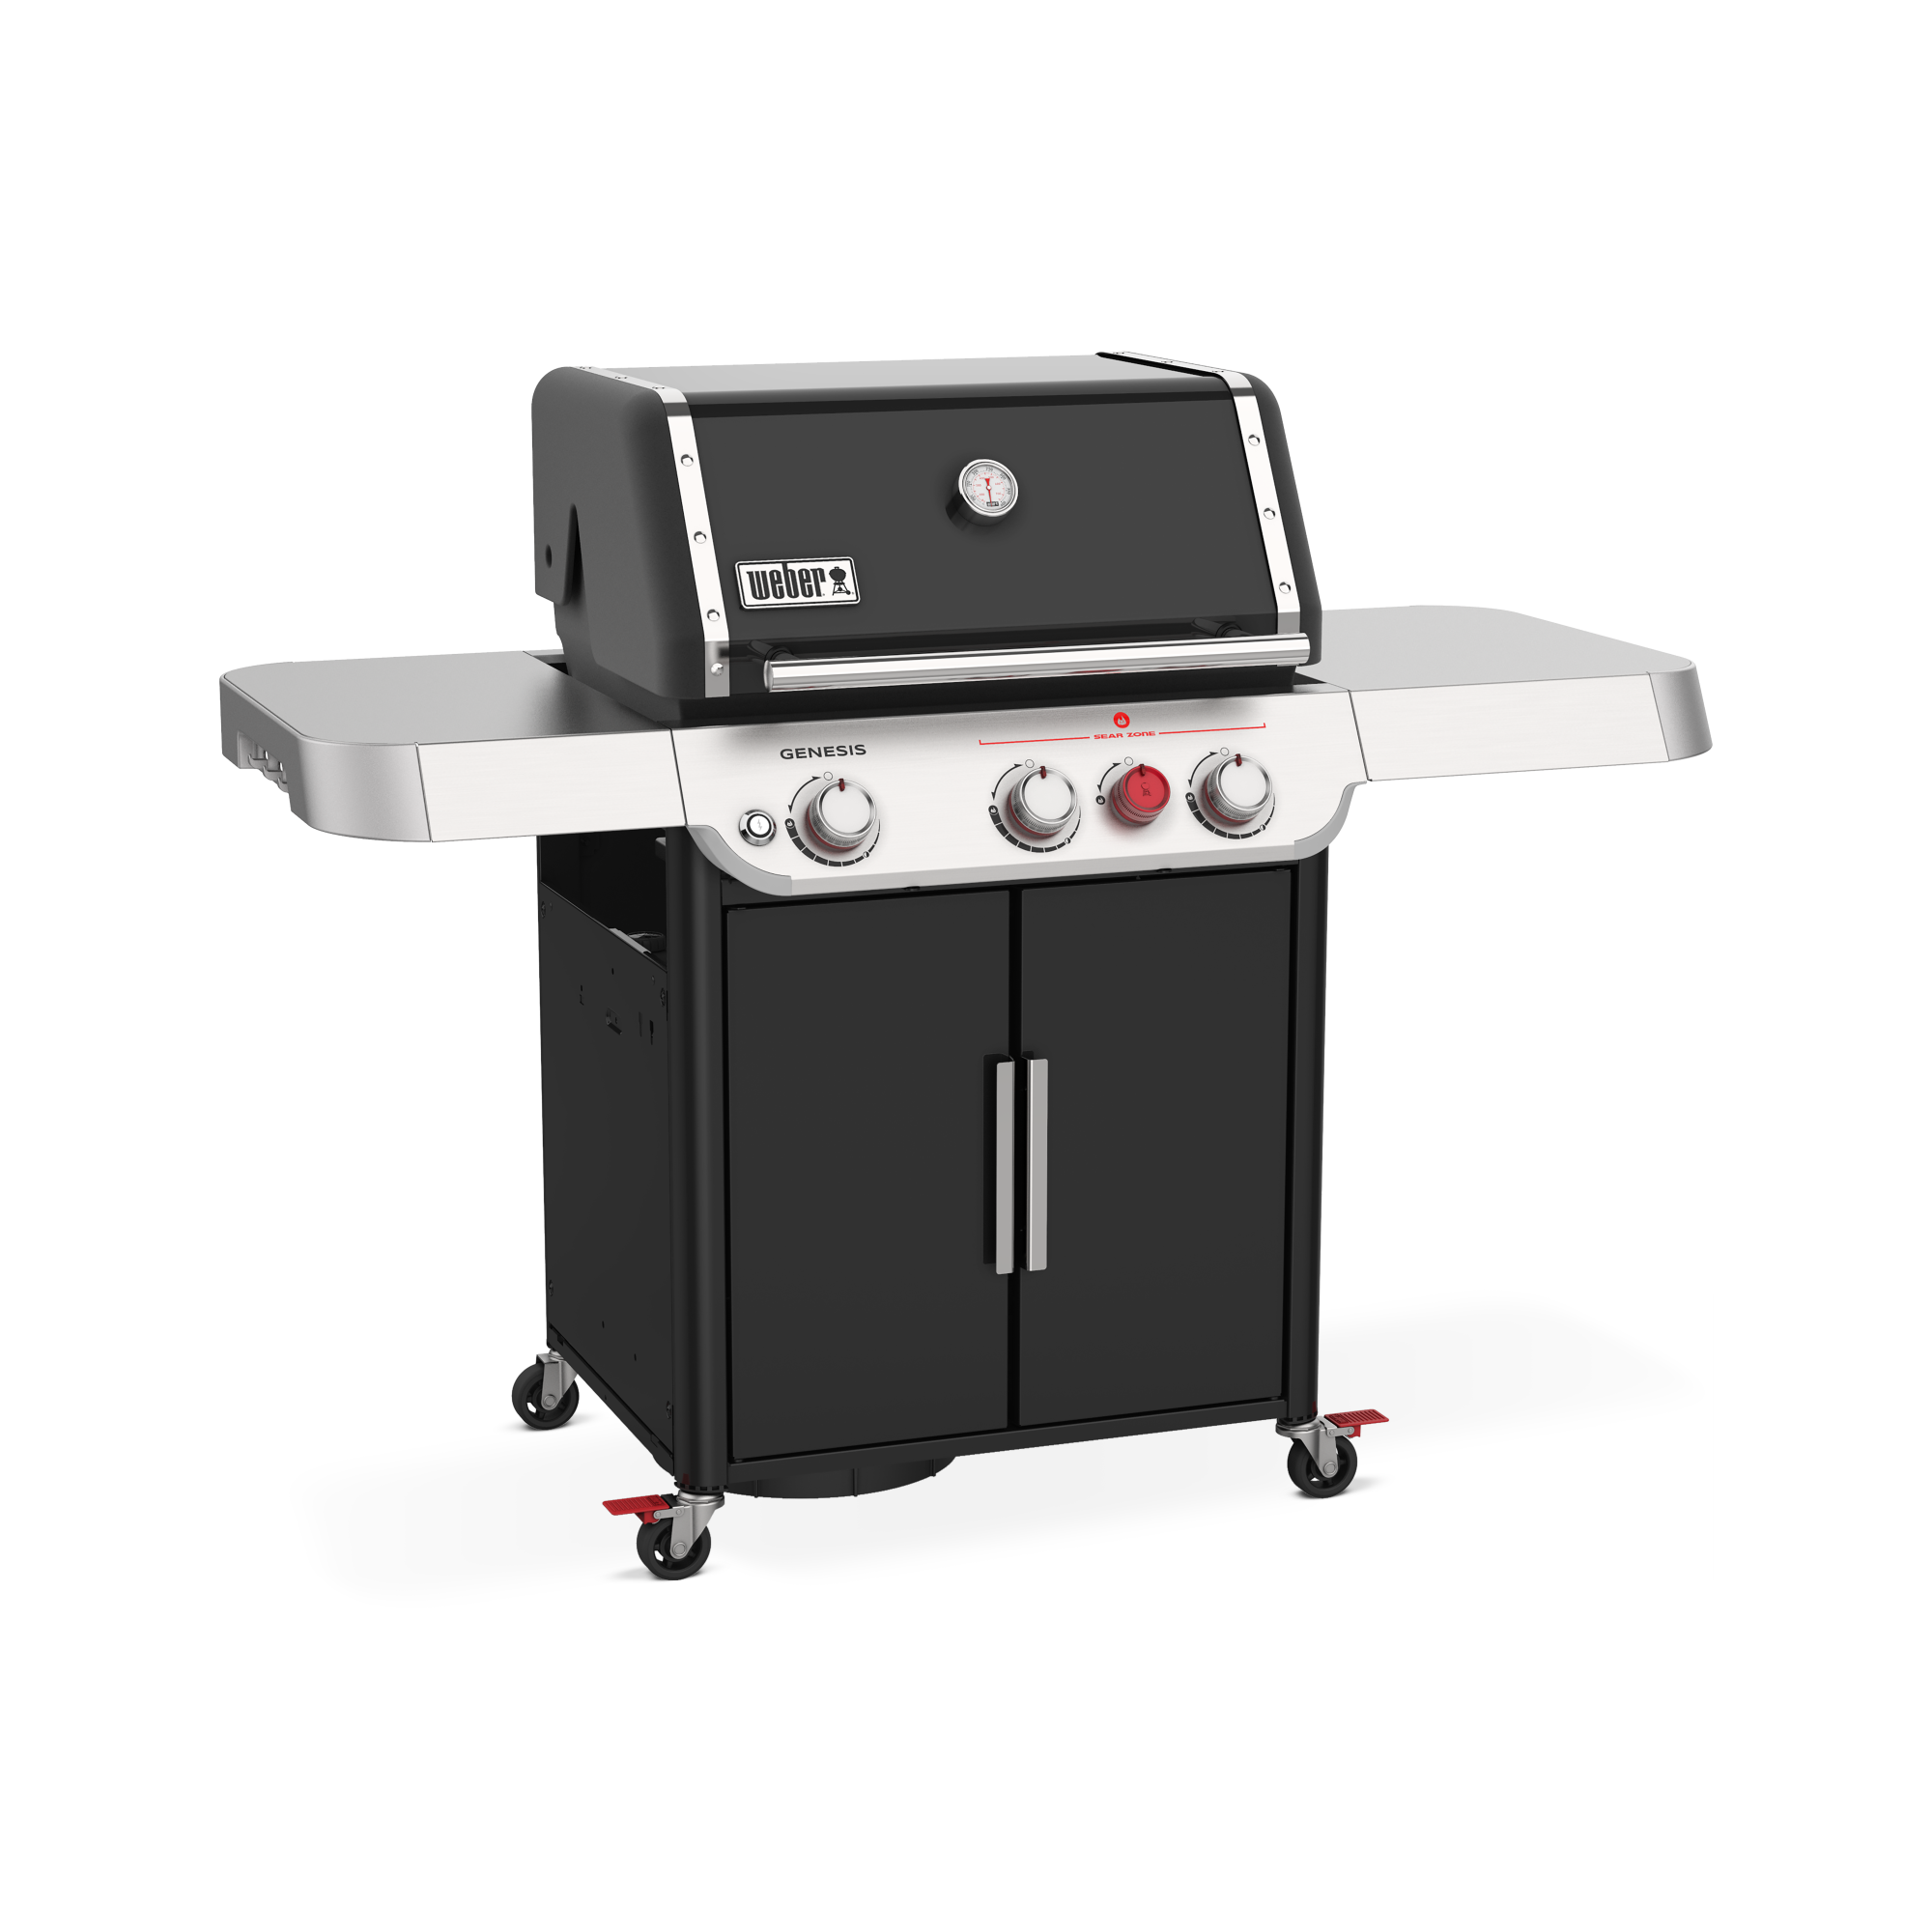 Gasgrill 'Genesis E-325S' schwarz 123,1 x 157,4 x 68,5 cm, 3 Brenner + product picture